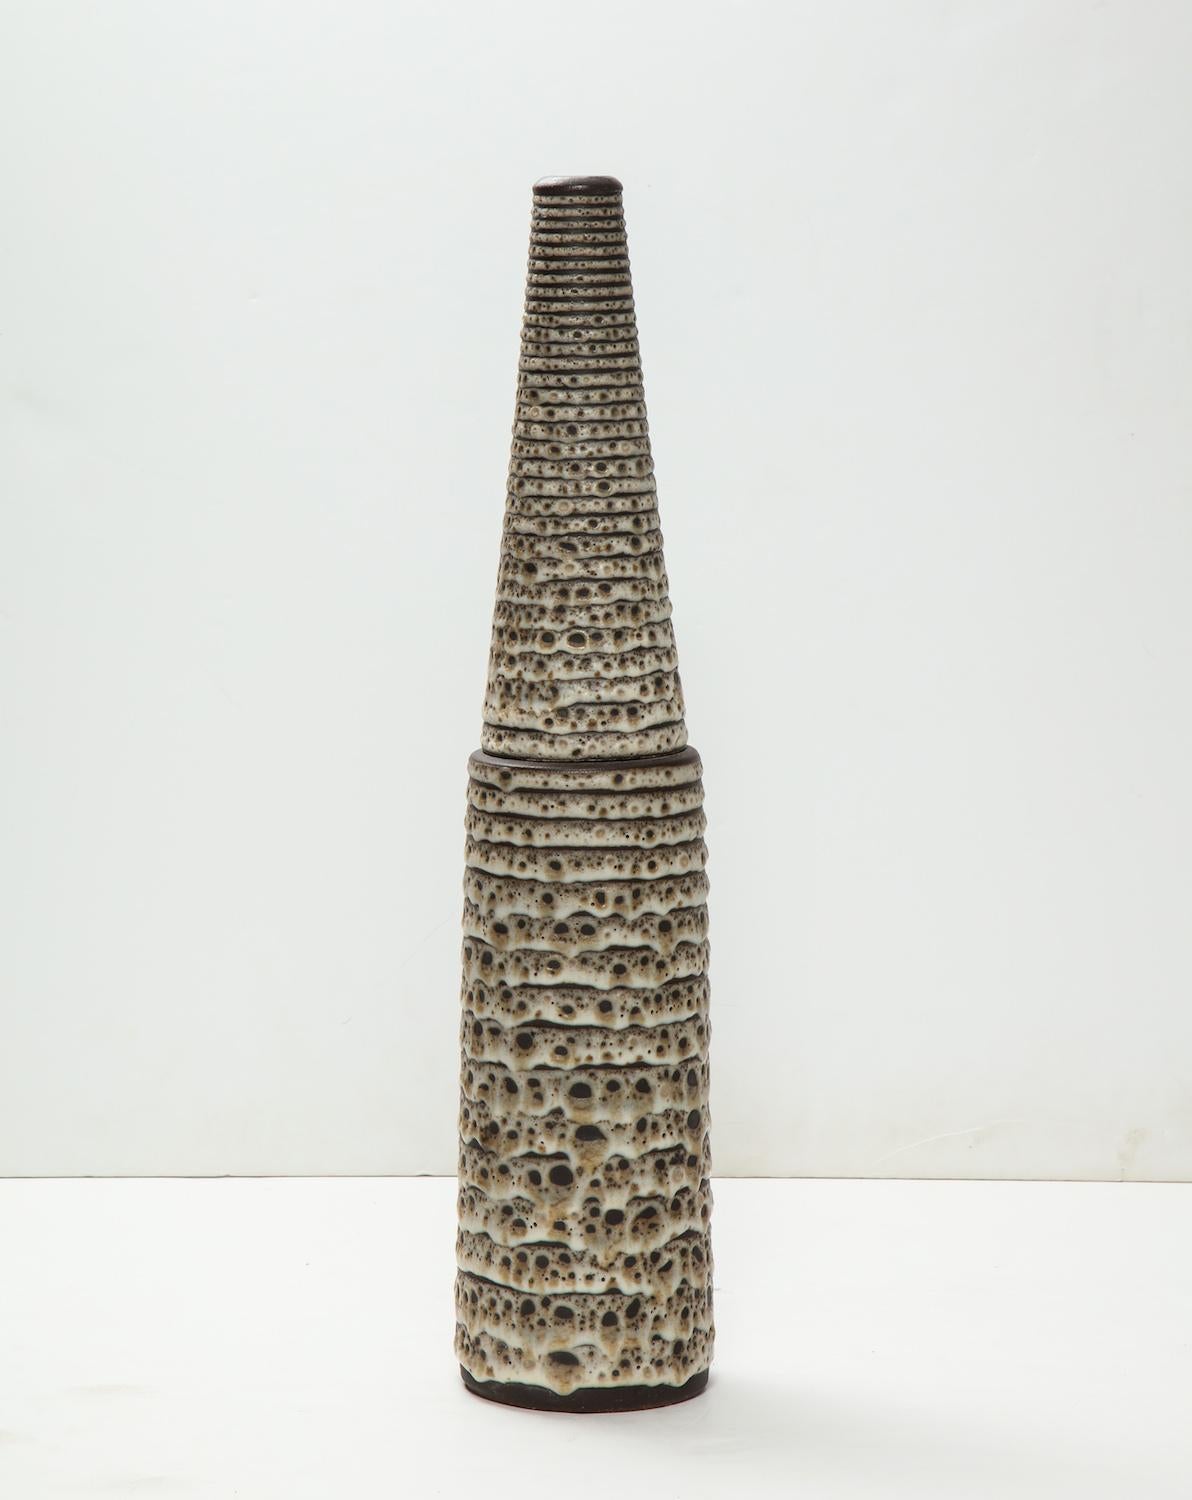 Large-scale cone and cylinder form vessel made on a wheel in two parts. Crater glaze in browns and cream. signed with artists stamp at side bottom.